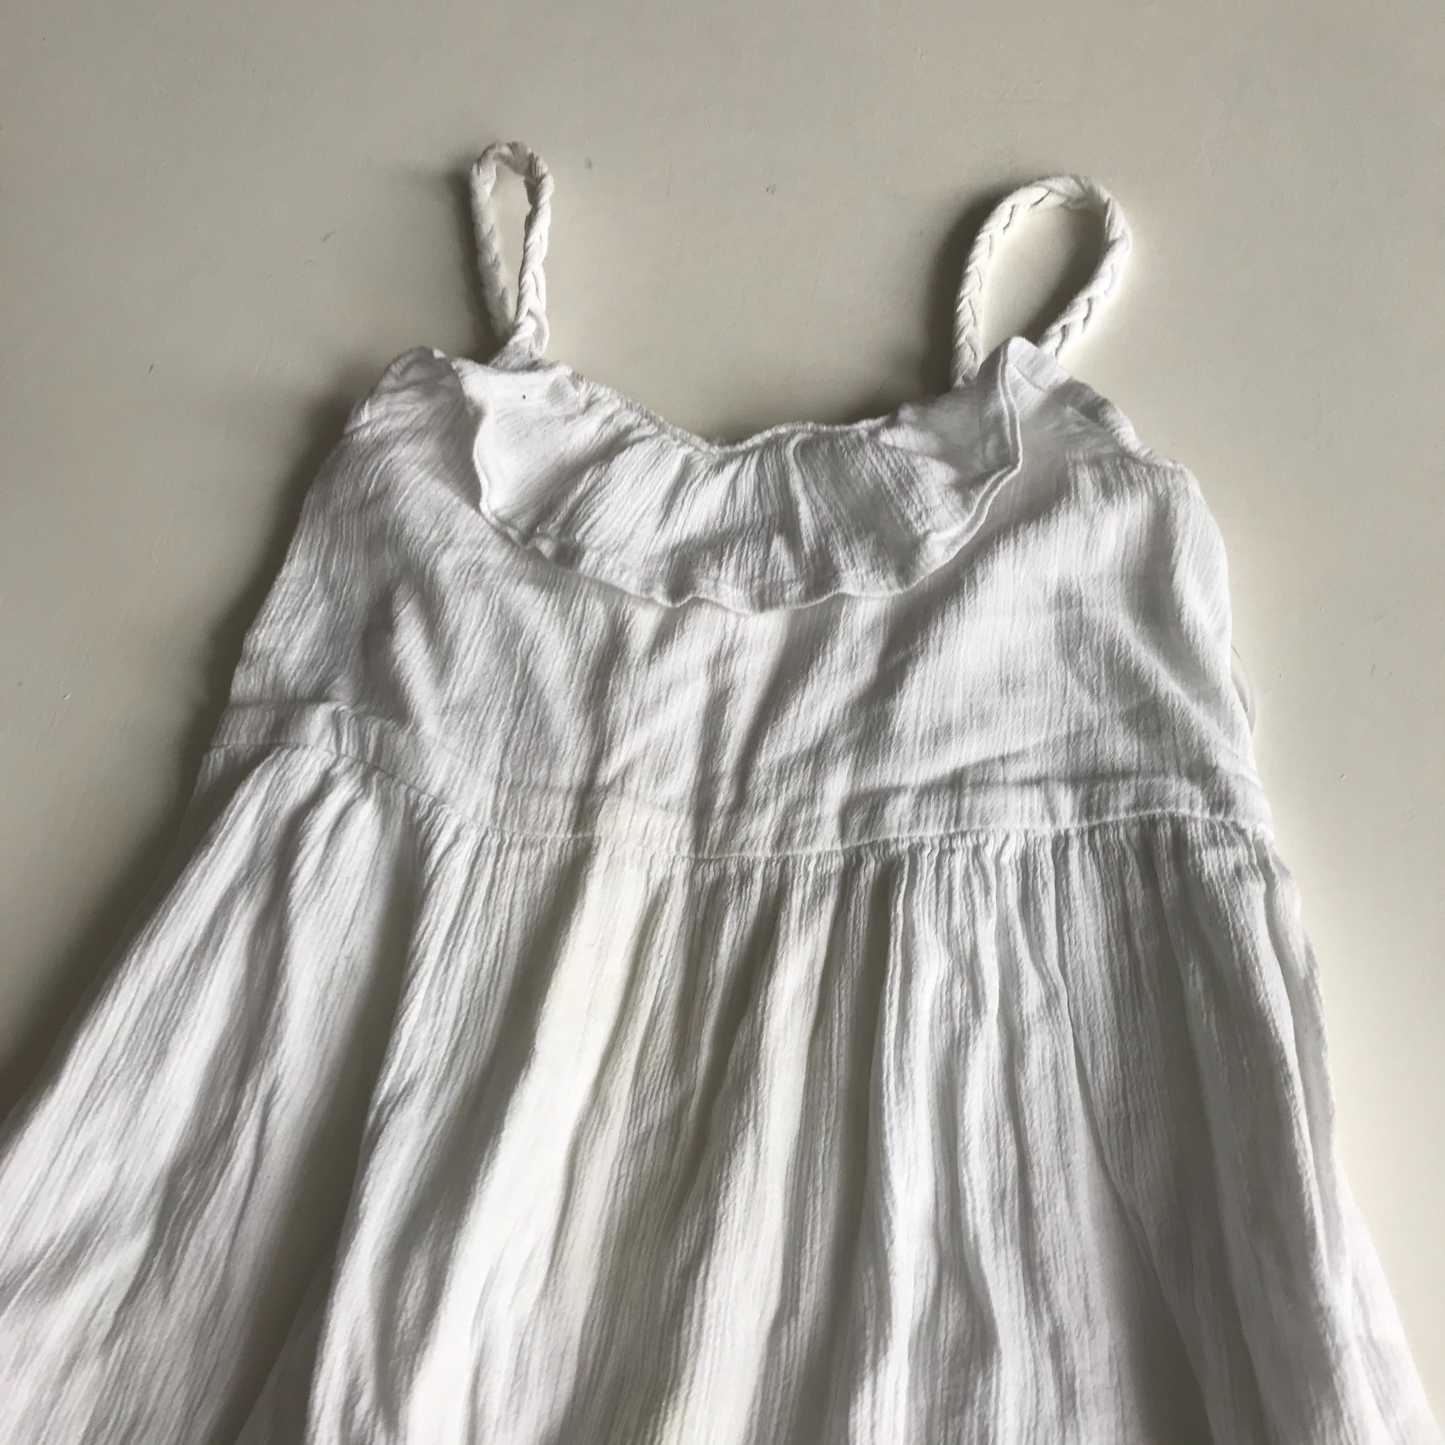 Dress - Long with Frill Detail - Age 7